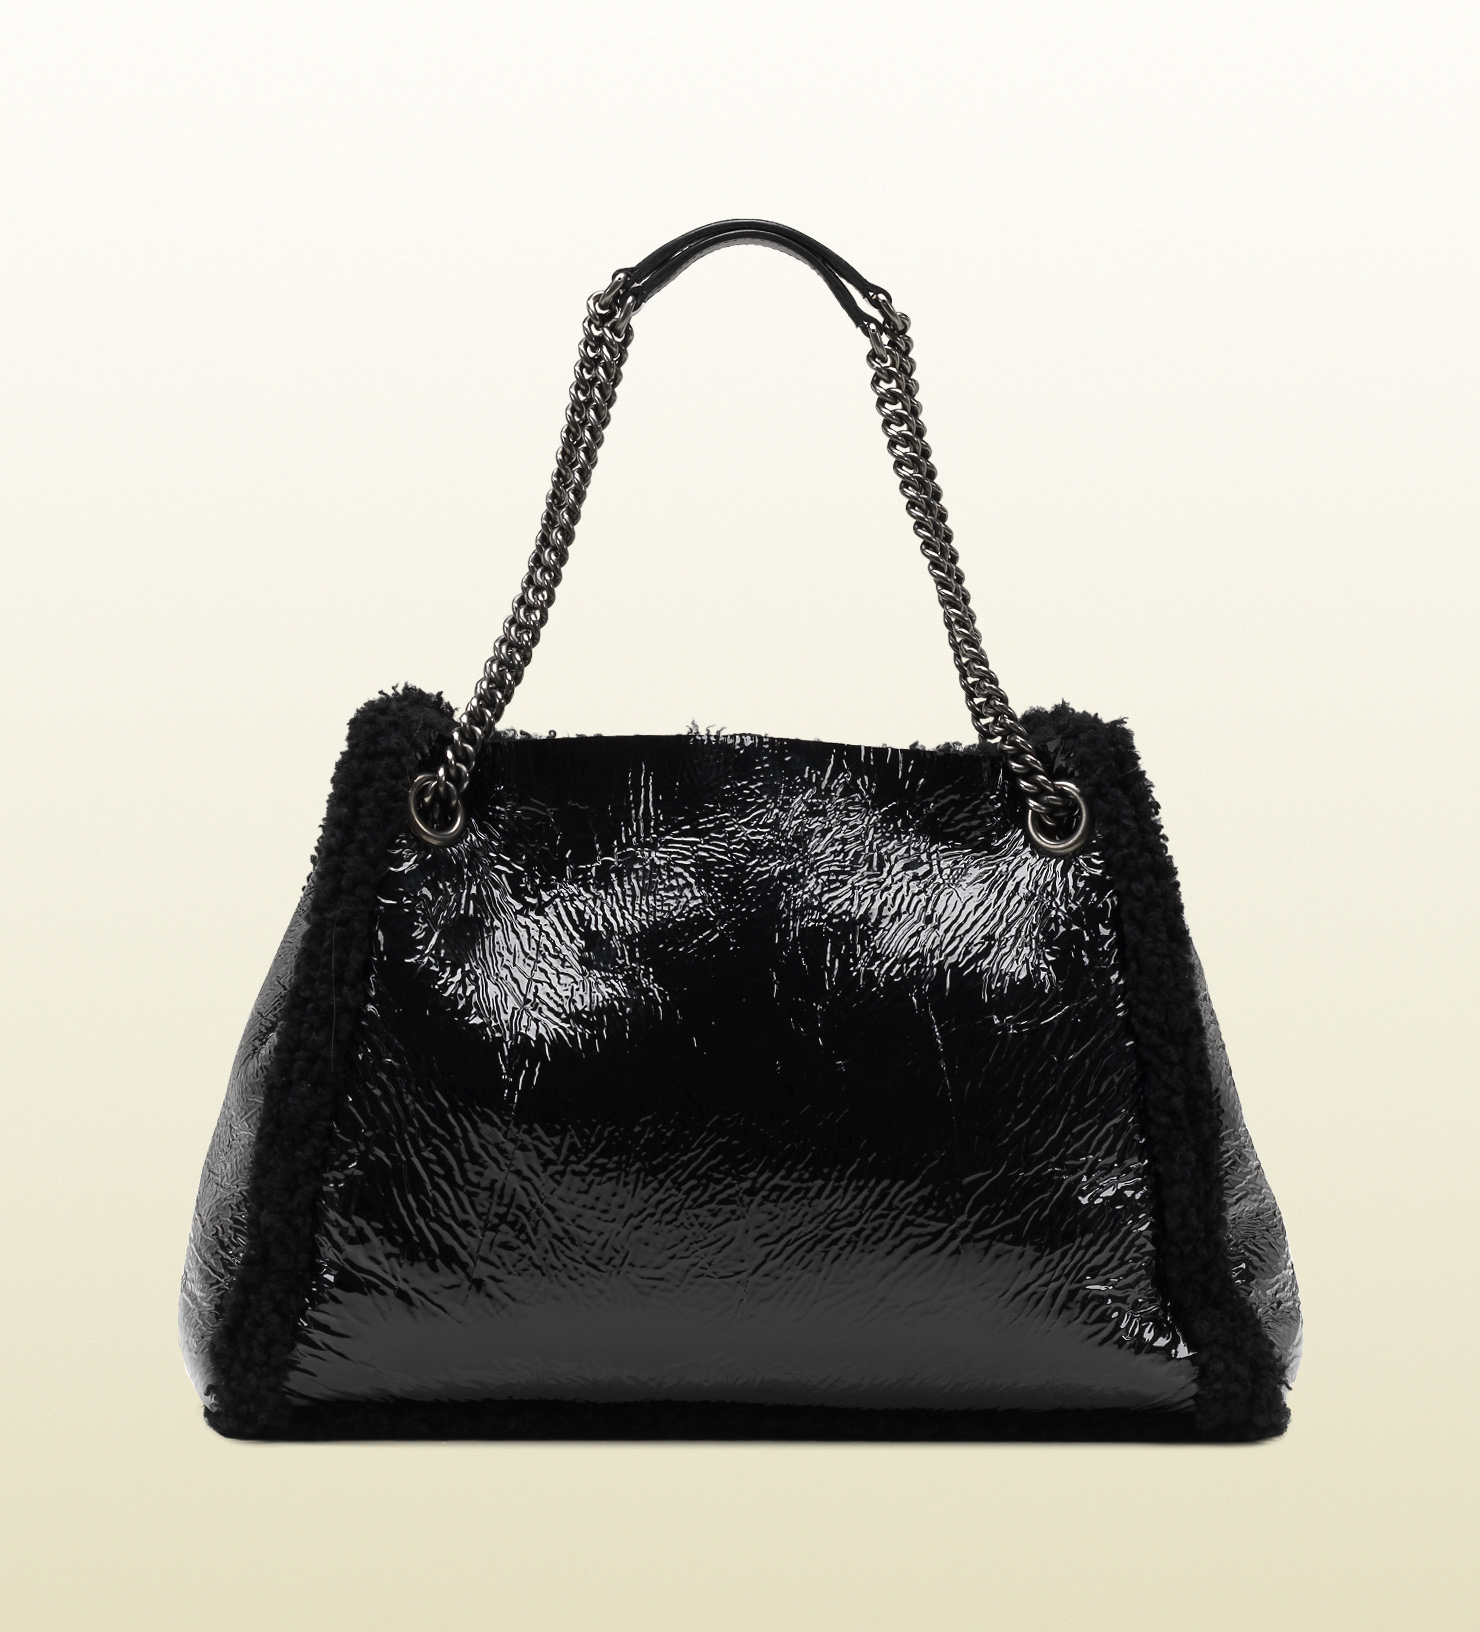 Gucci Soho Crushed Patent Leather Shoulder Bag in Black - Lyst